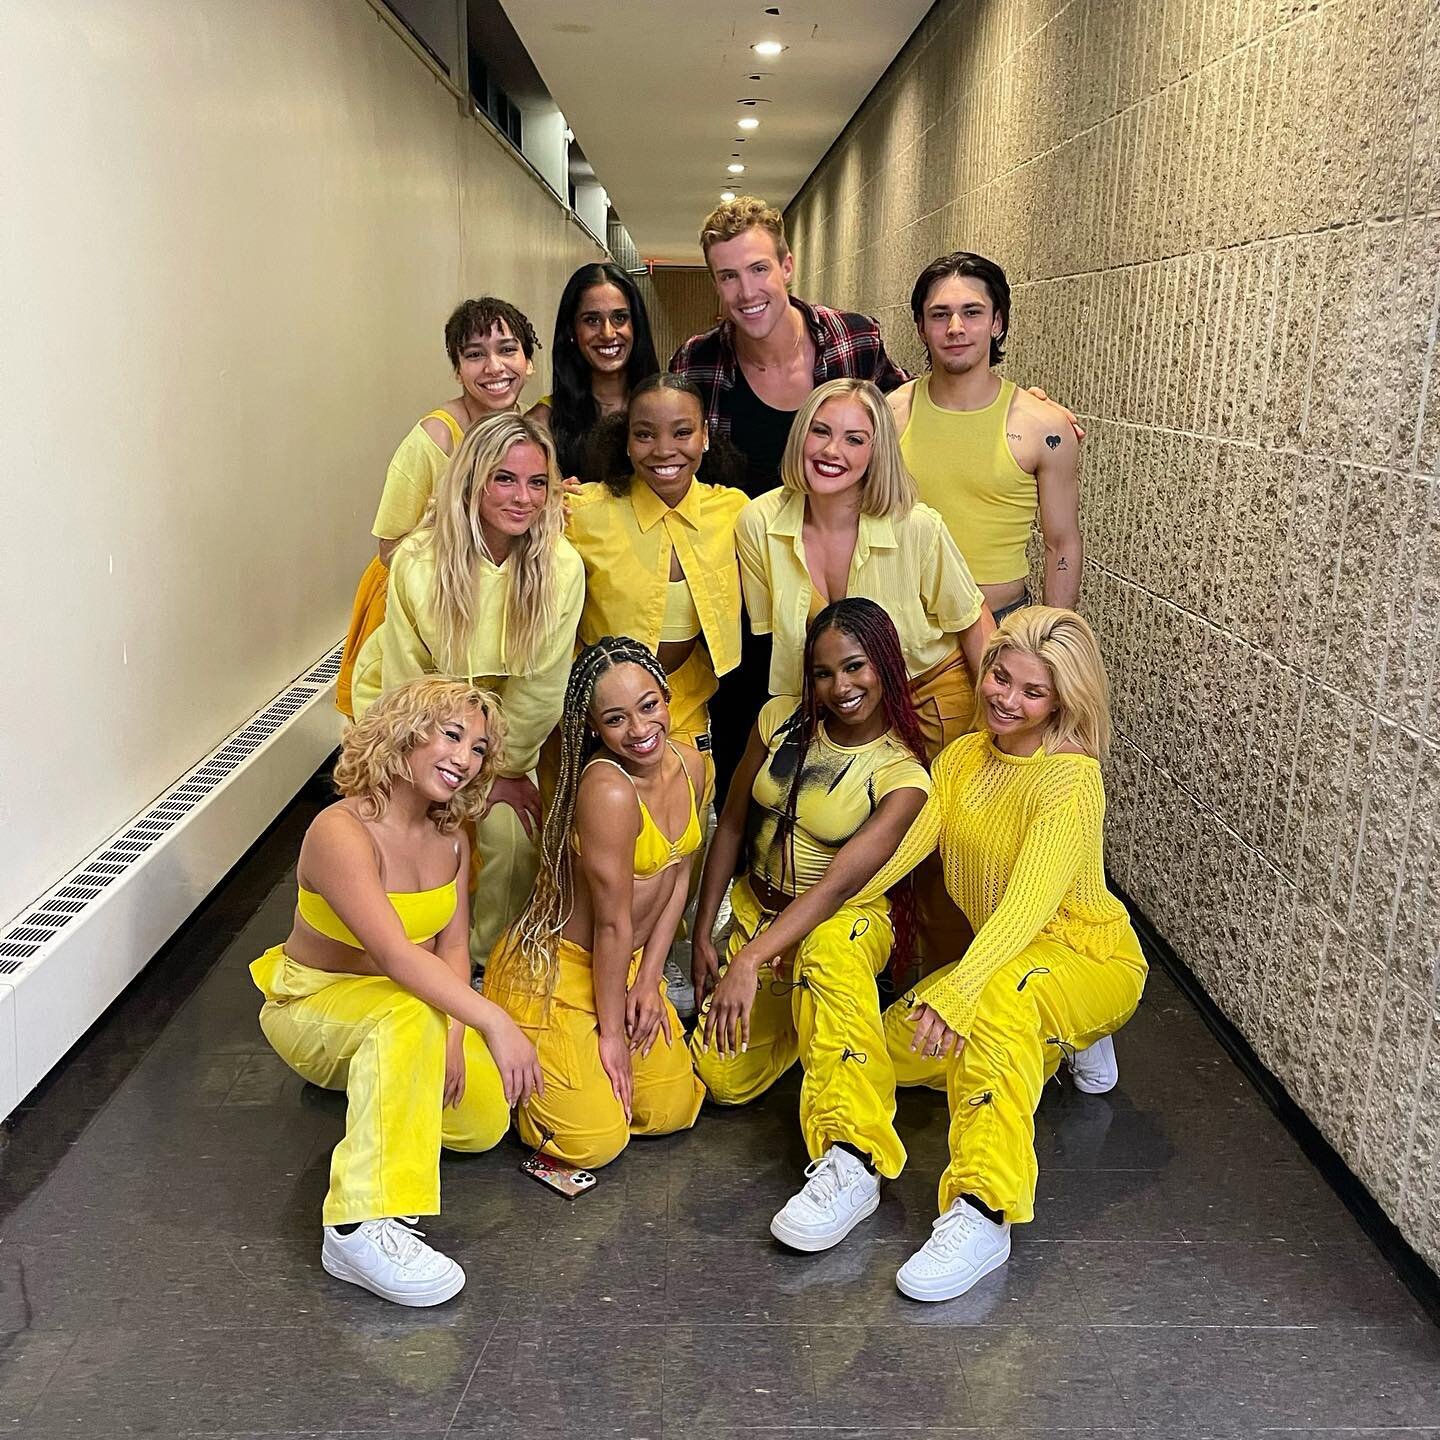 Double Bubble Trouble @pacecommercialdance Dance Out Loud 2023 x @mileskeeney choreography 💛 what a moment and the most joyous choreographic process throughout this semester with these superstar dancers, dance captains, and understudies. Will drop s